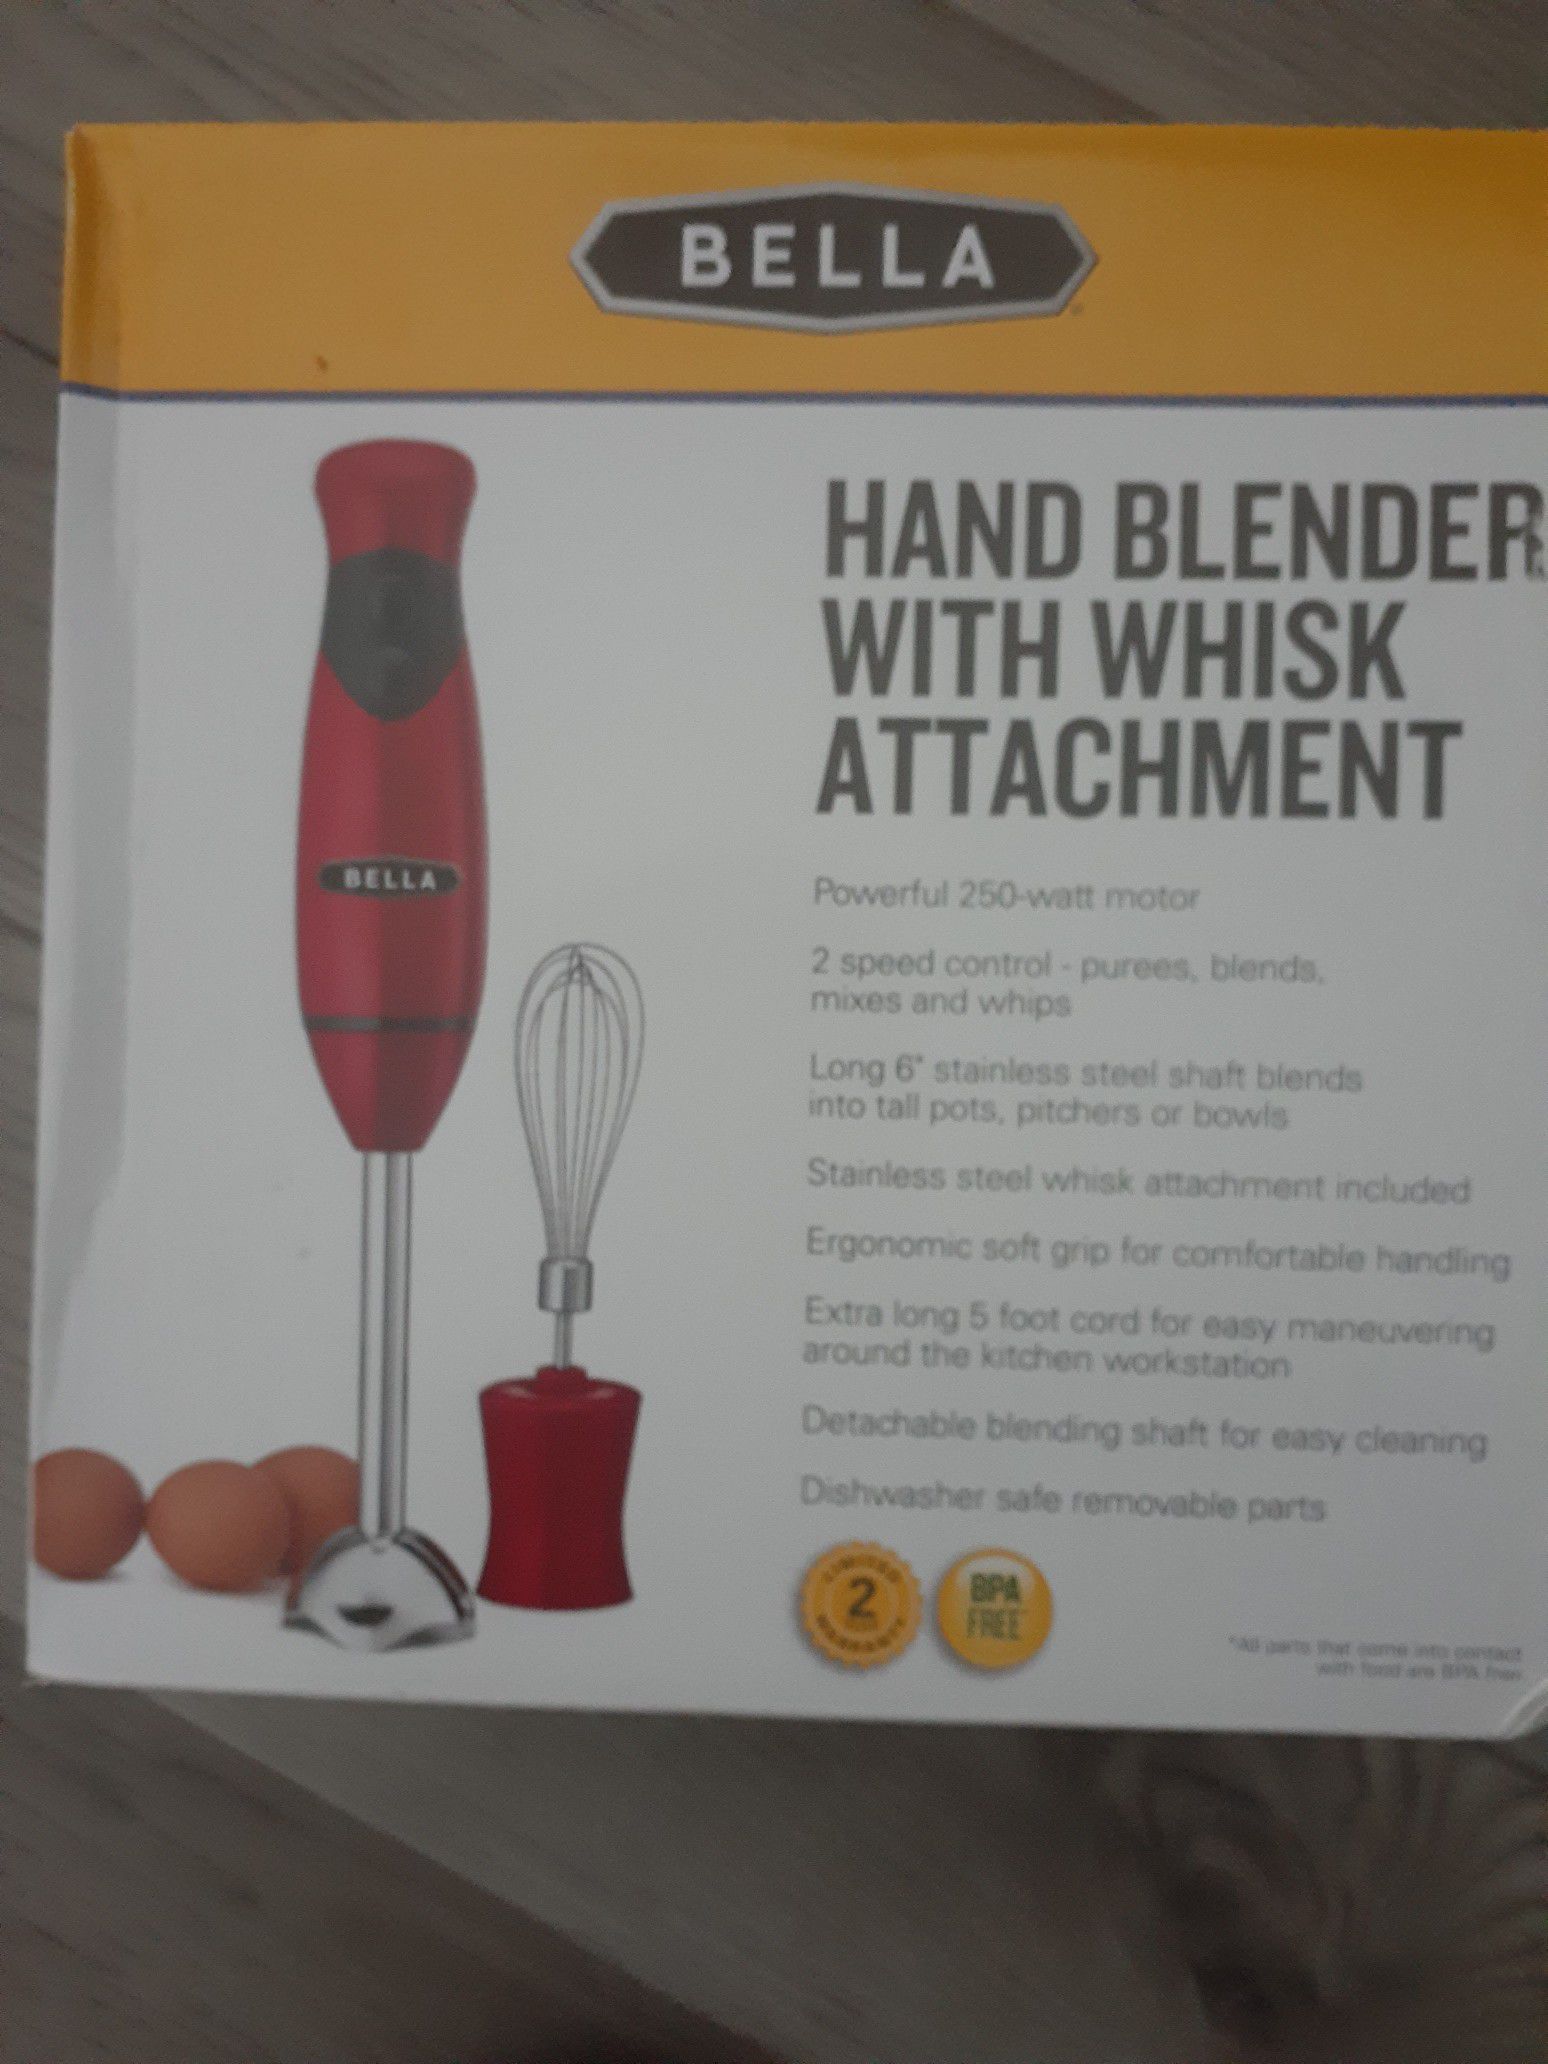 Blender with whisk attachment